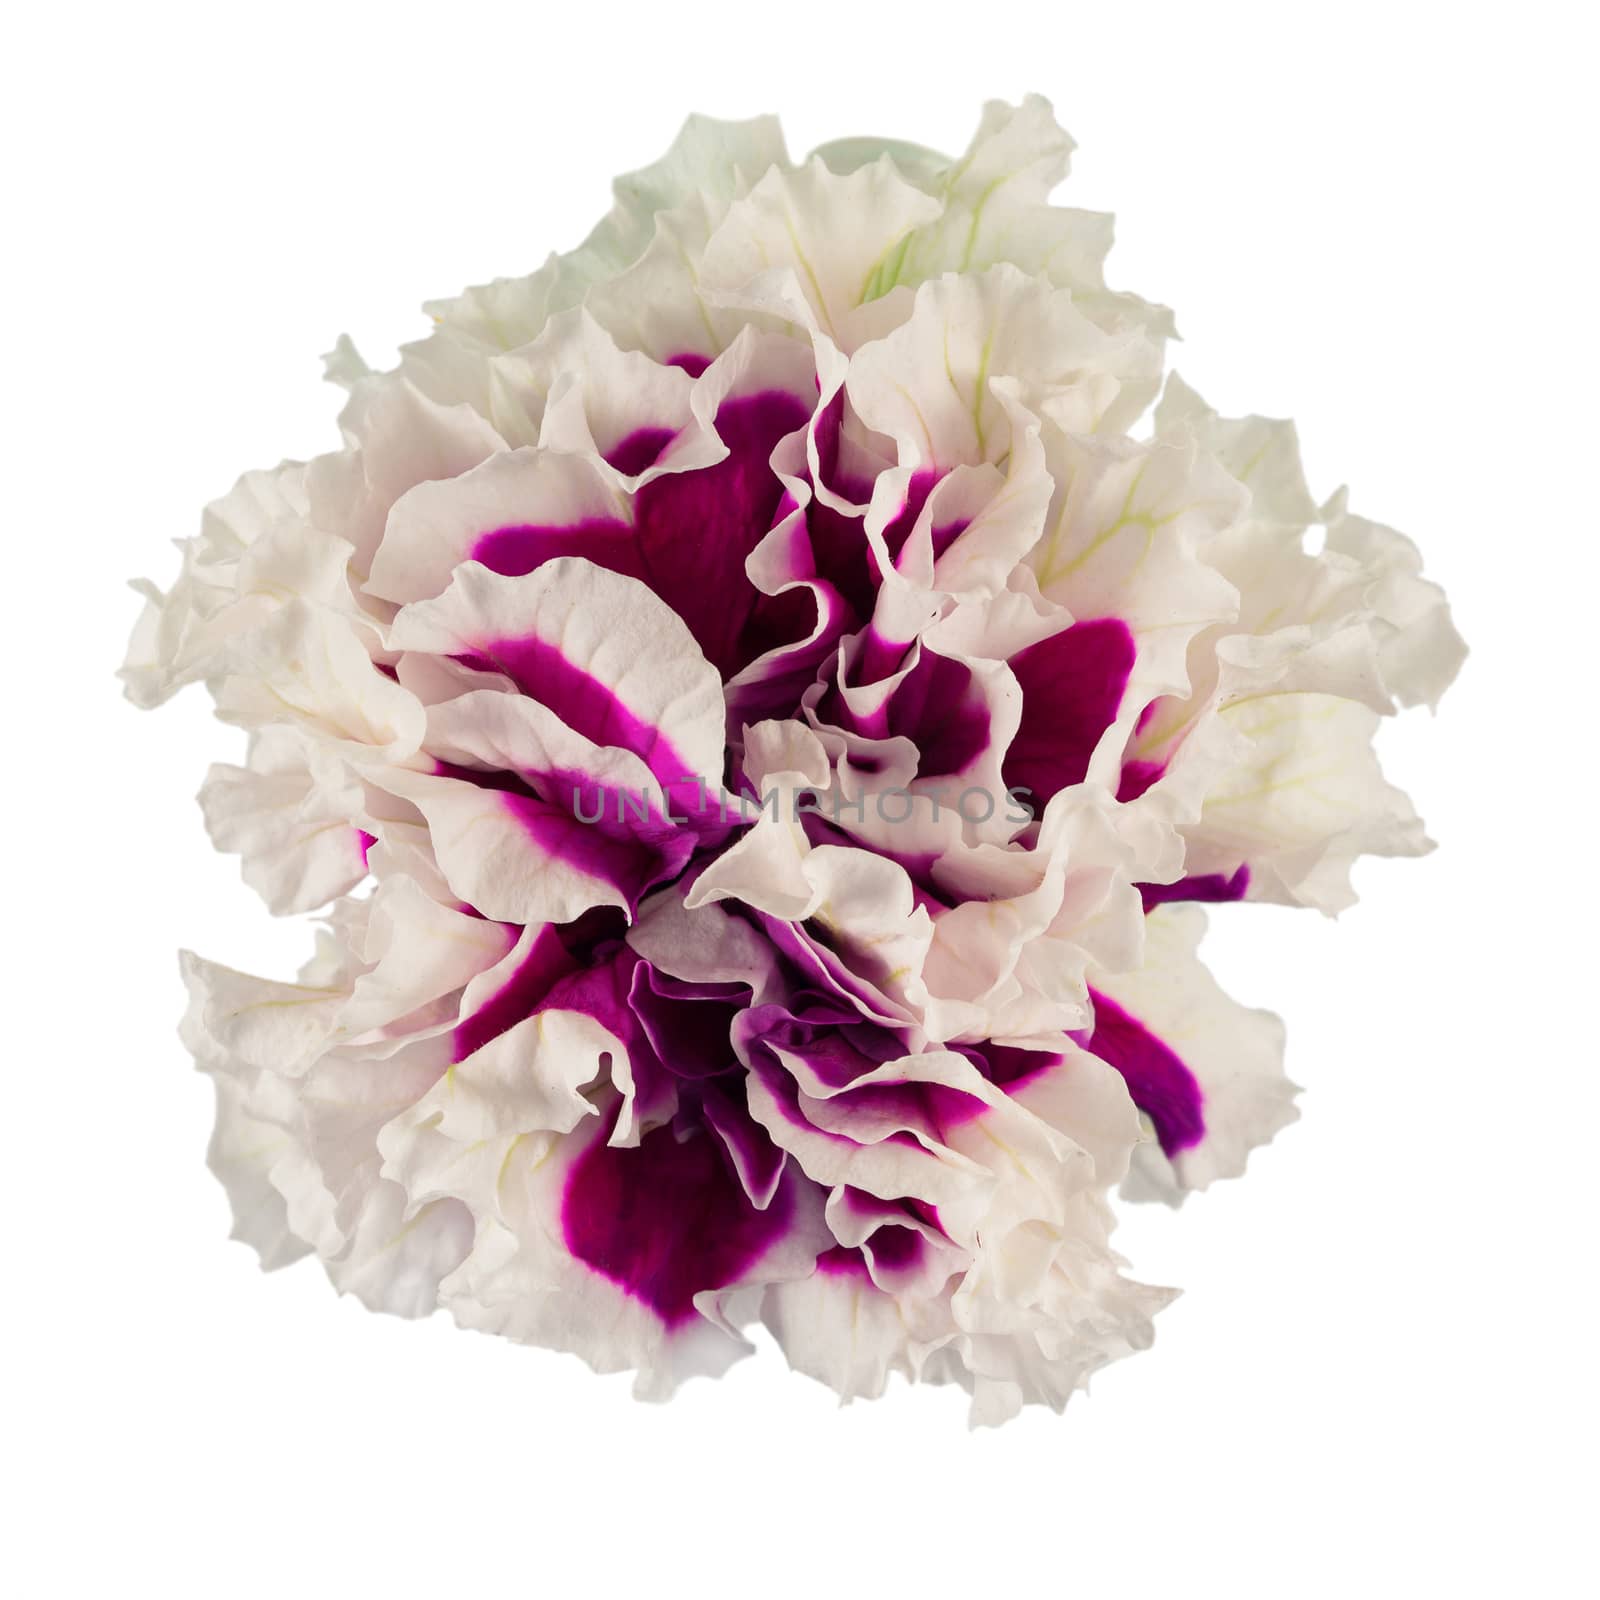 Petunia flower isolated on a white background 